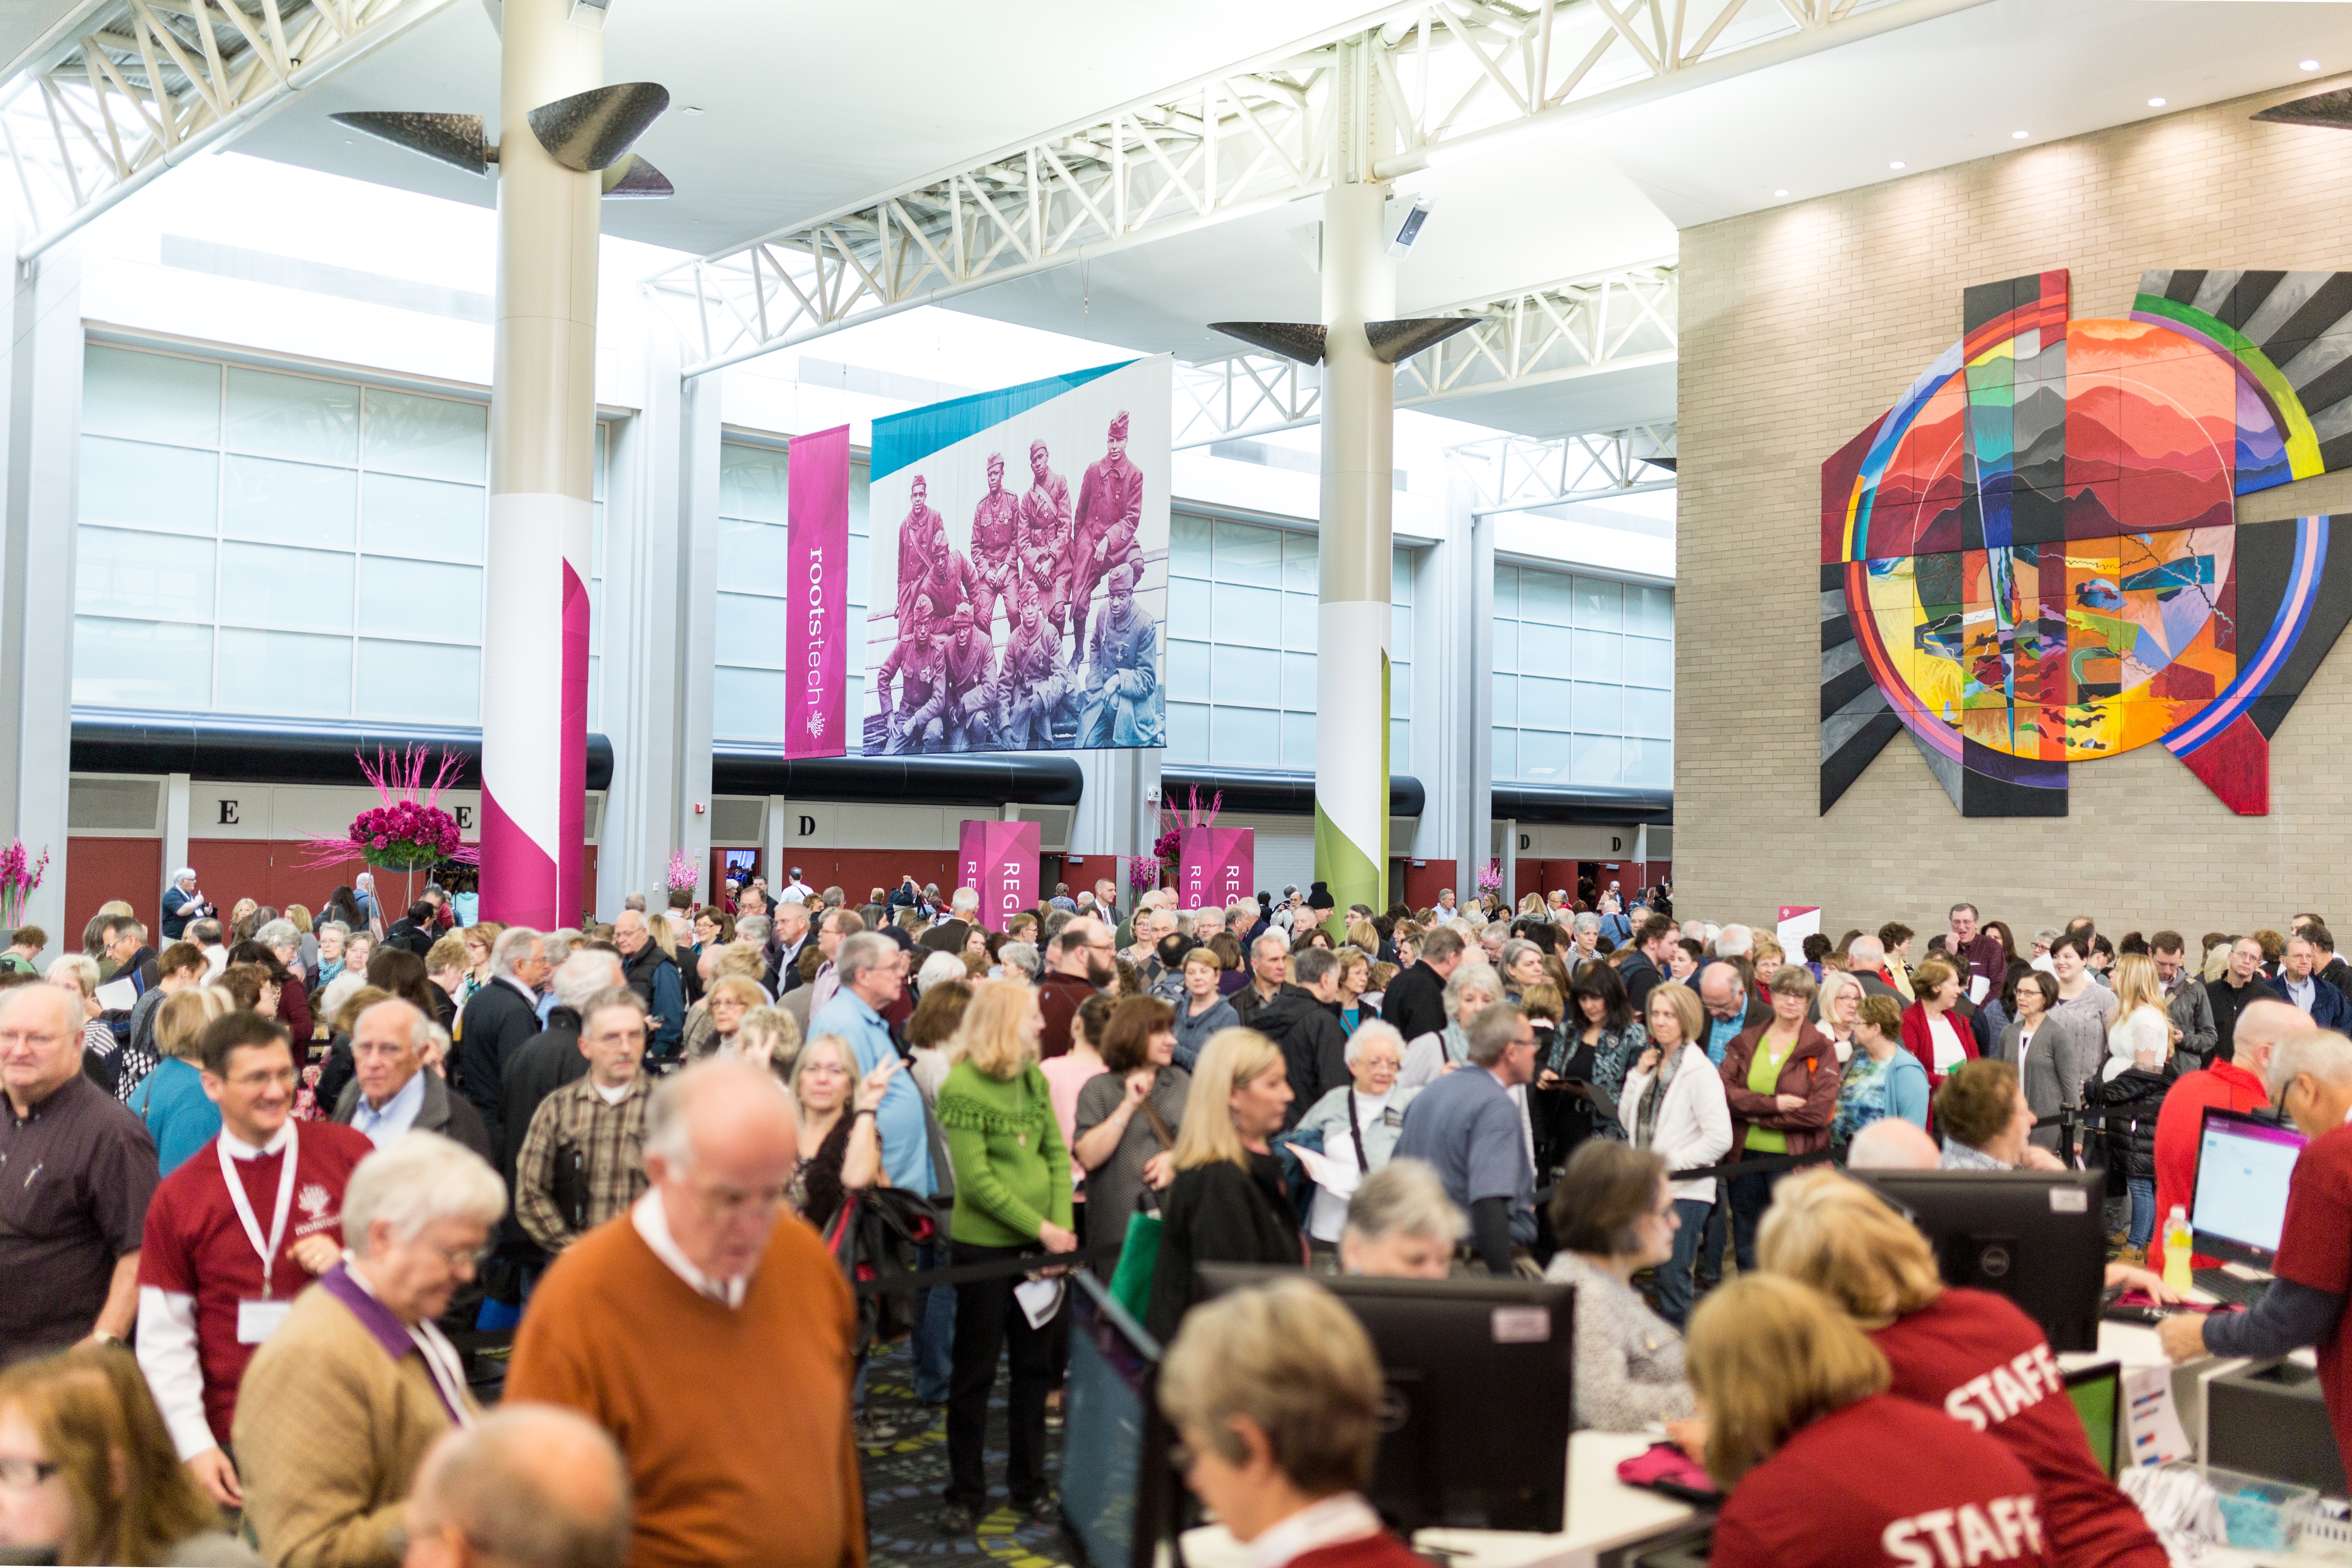 A number of pictures featuring men, women, and children enjoying their time at RootsTech 2017.